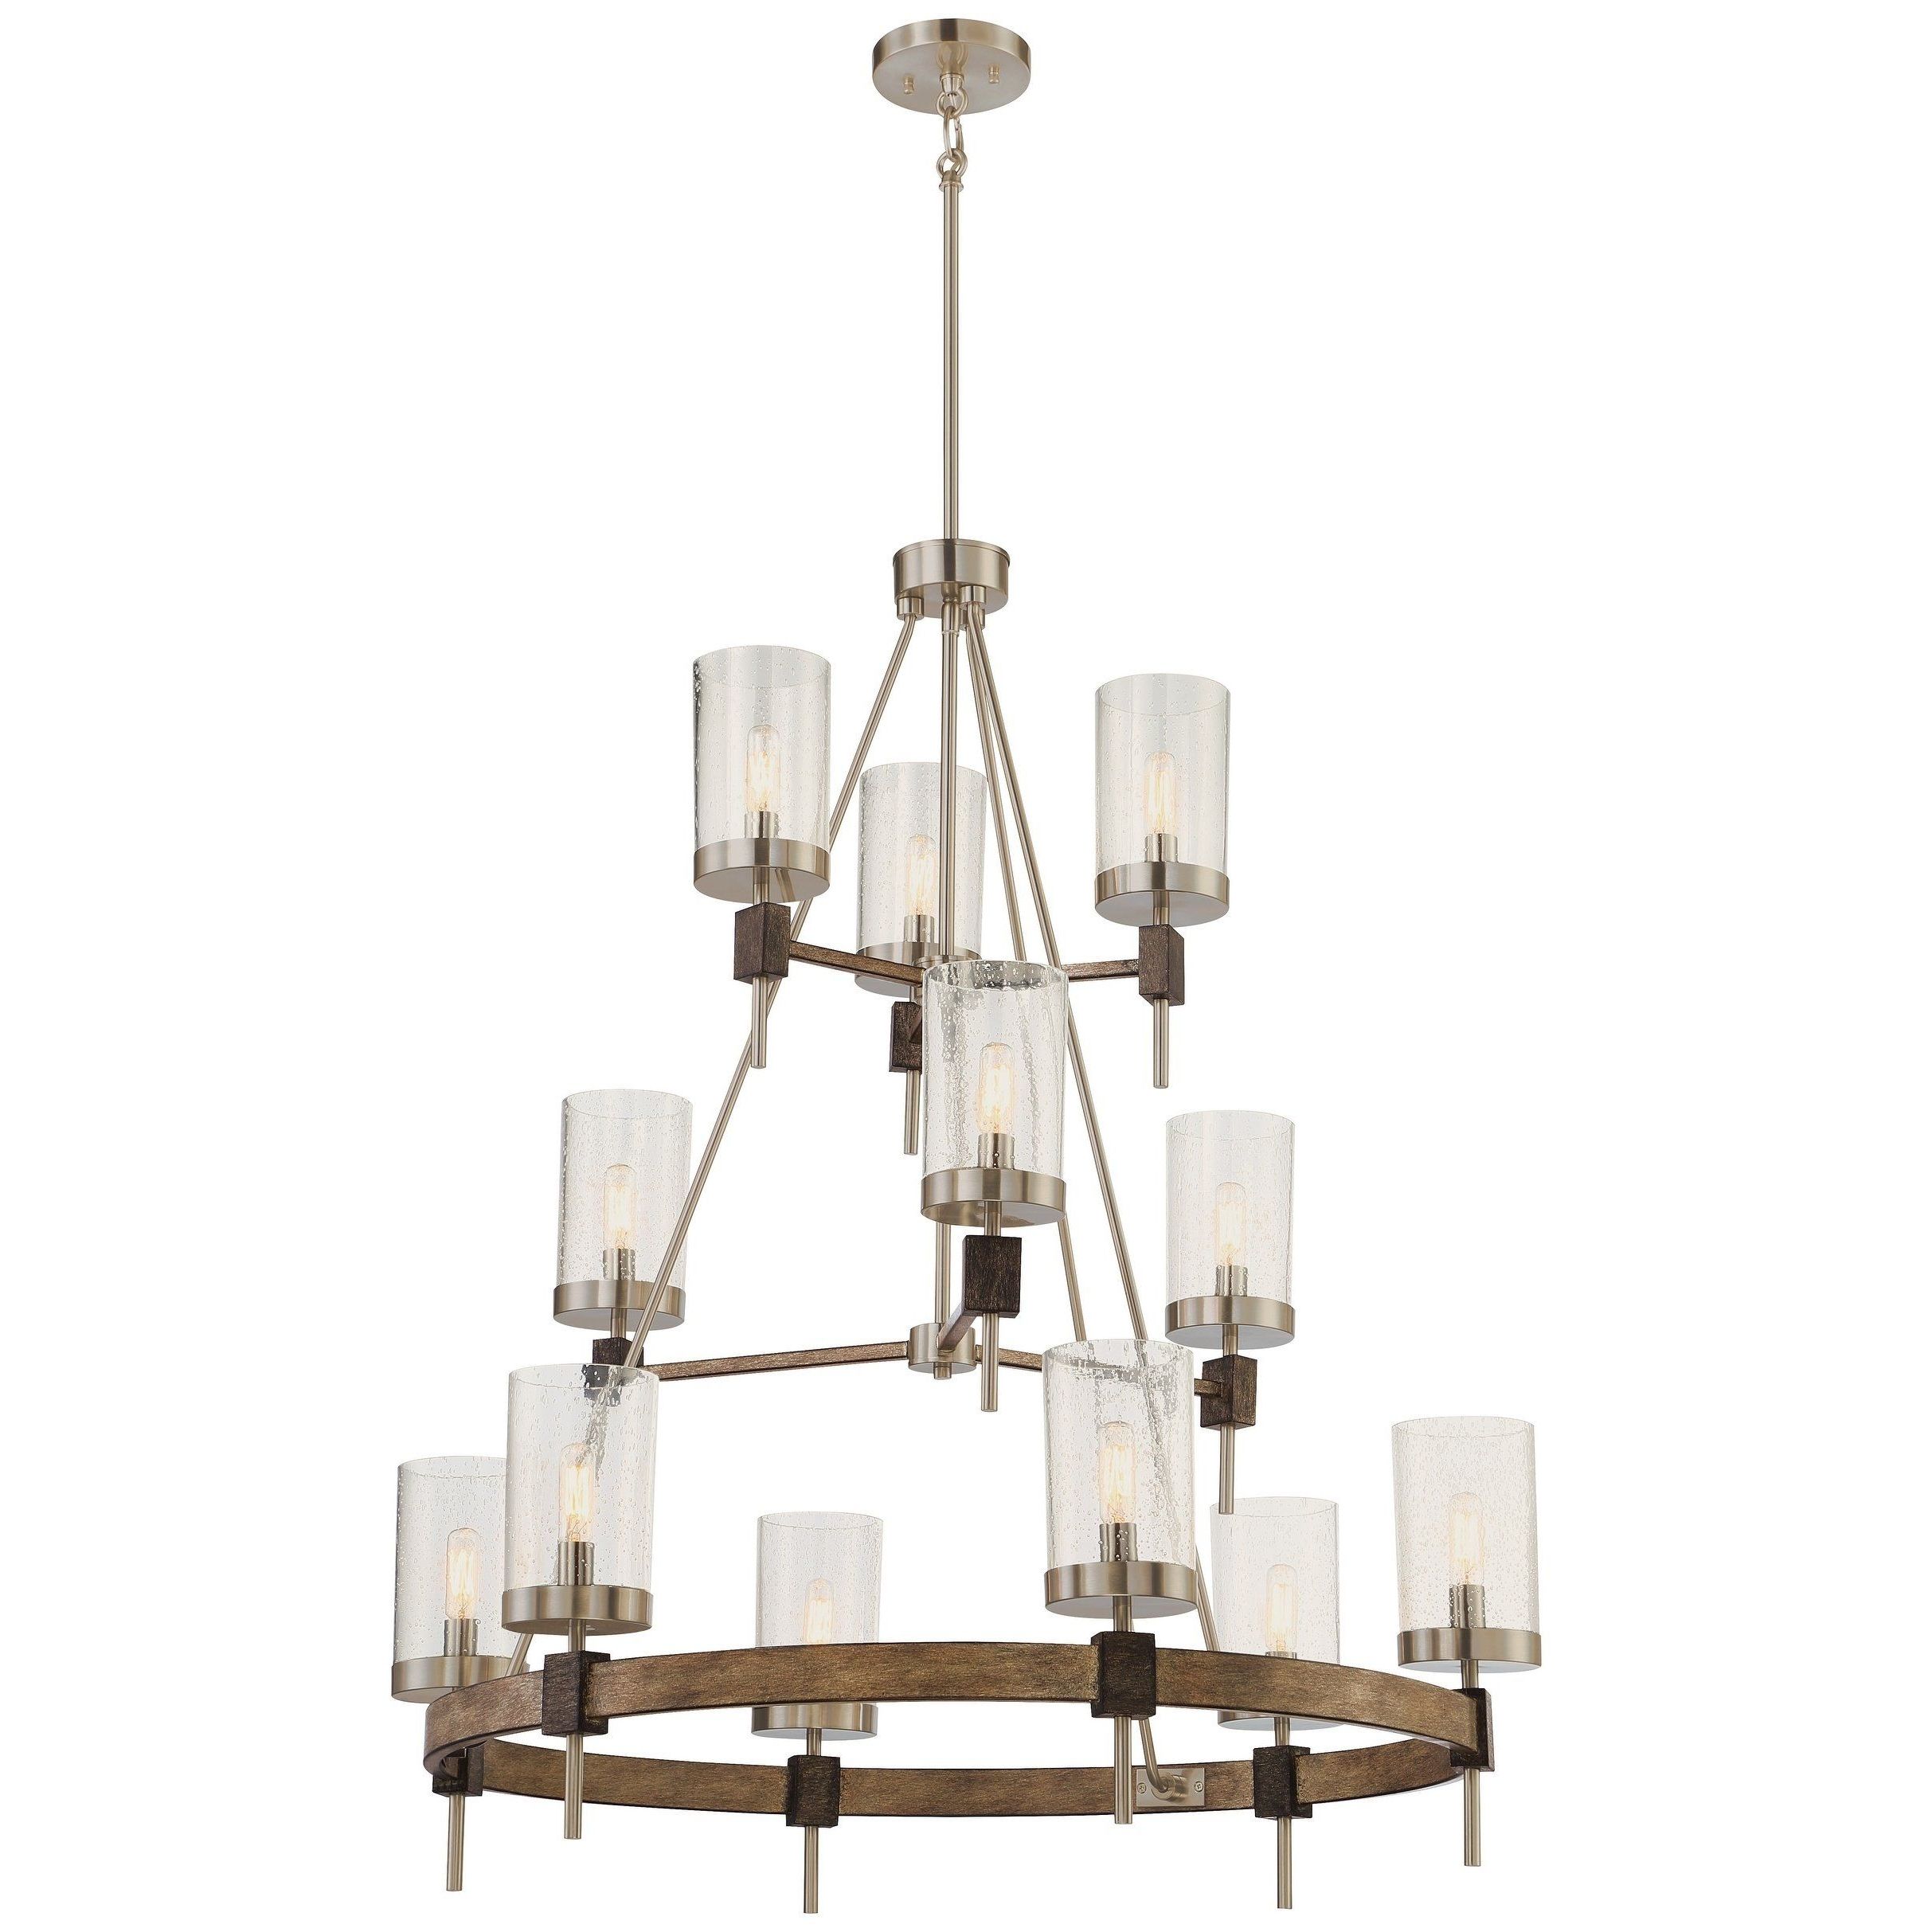 Well Known Minka Lavery Bridlewood 12 Light Stone Grey W/Brushed Pertaining To Stone Gray And Nickel Chandeliers (View 11 of 15)